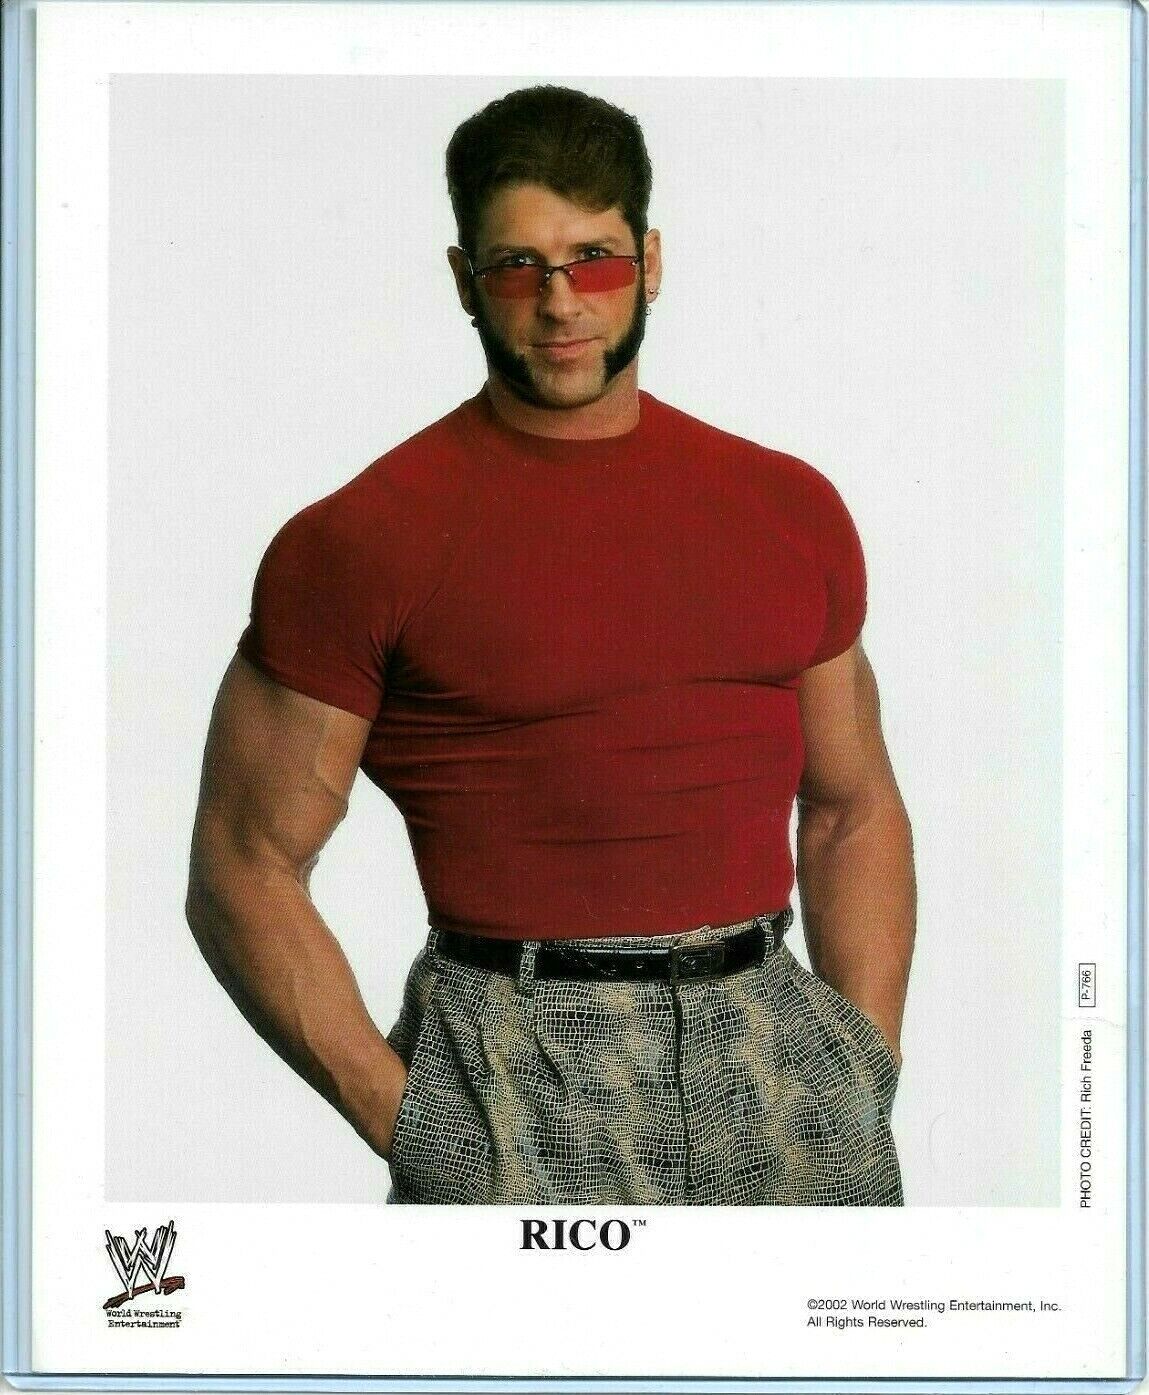 WWE RICO P-766 OFFICIAL LICENSED AUTHENTIC ORIGINAL 8X10 PROMO Photo Poster painting VERY RARE